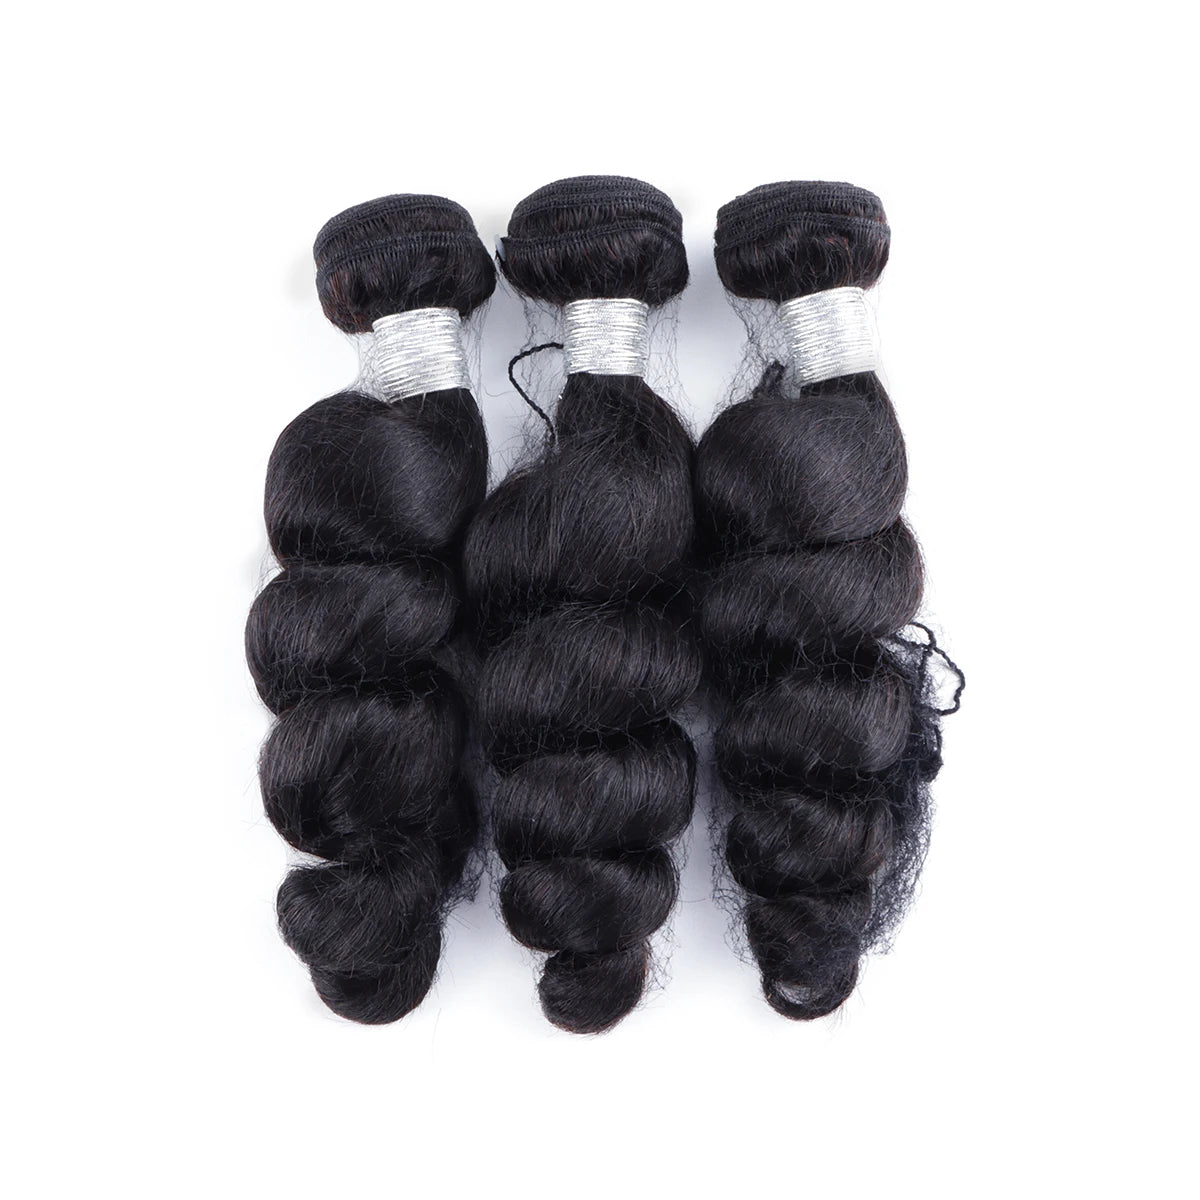 VAST Wholesale Cuticle Aligned Straight Virgin Hair Bundles Vendor Body Wave Human Hair Extension With Lace Frontal Closure